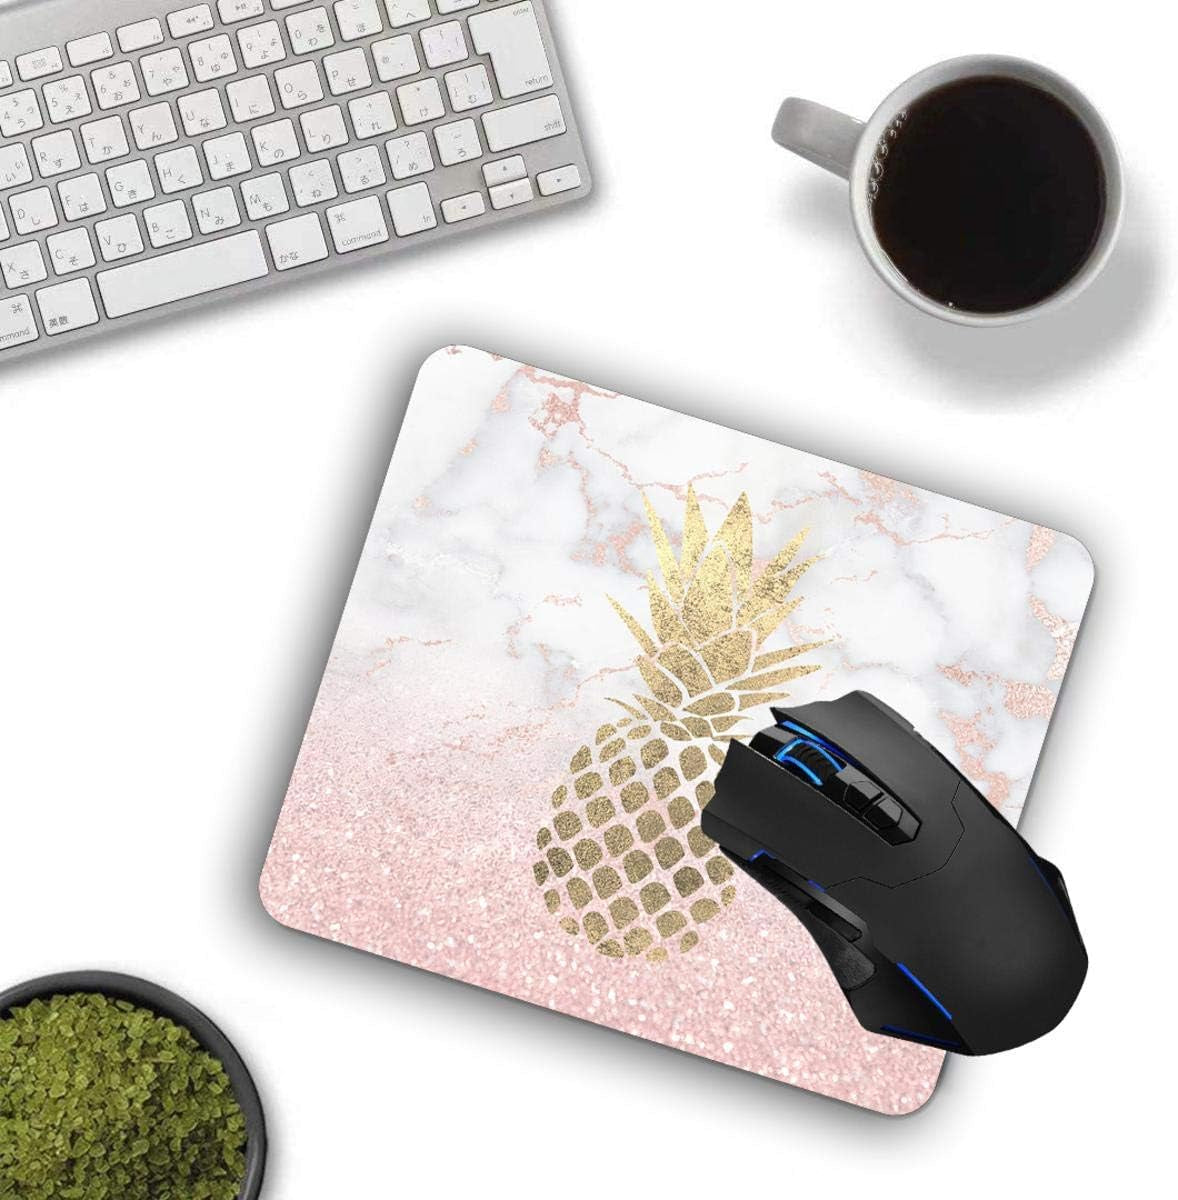 Mouse Pad,Pineapple on Marble Computer Mouse Pads Desk Accessories Non-Slip Rubber Base,Mousepad for Laptop Mouse